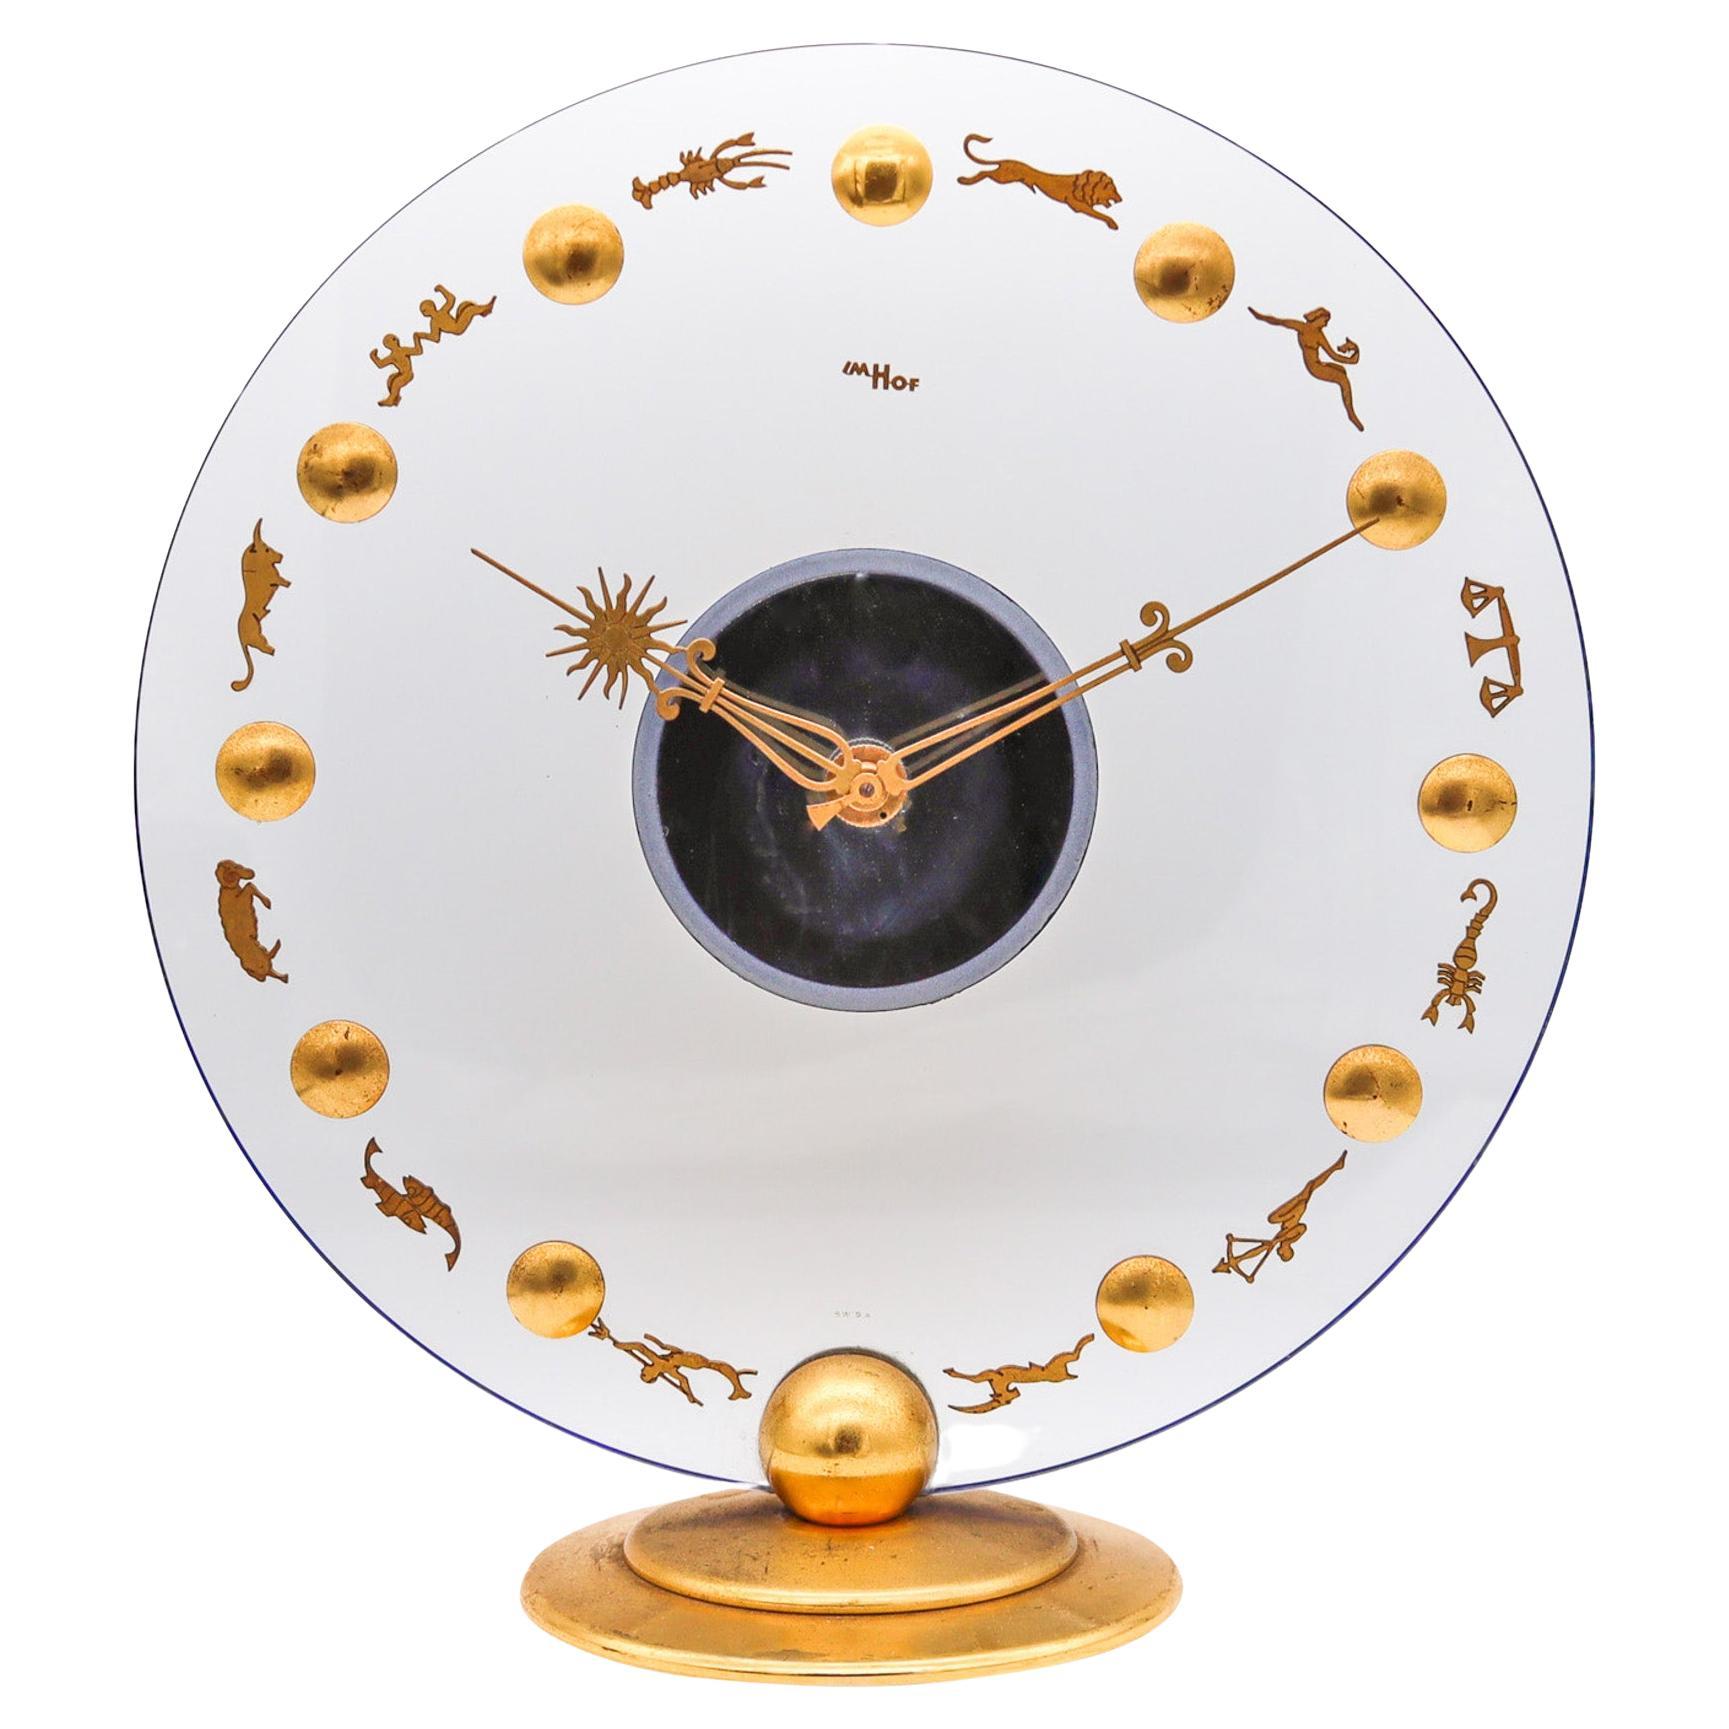 Imhof Swiss 1950 Zodiacal Modernist 8 Days Desk Clock in Gilded Bronze and Glass